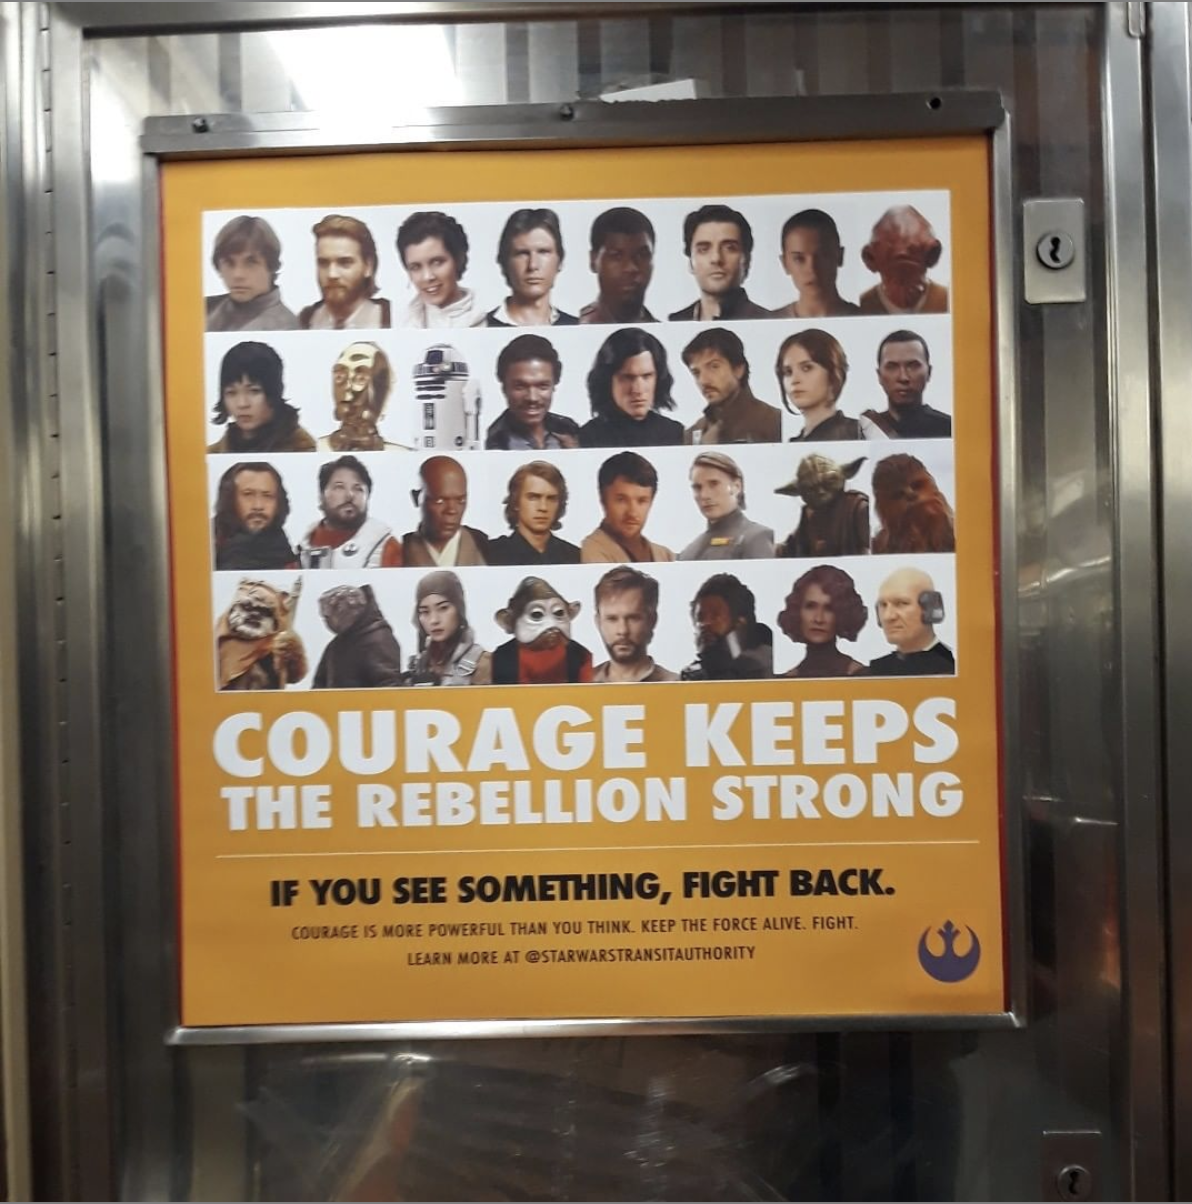 poster inside an MTA subway cart featuring the cast from the Star Wars films titled 